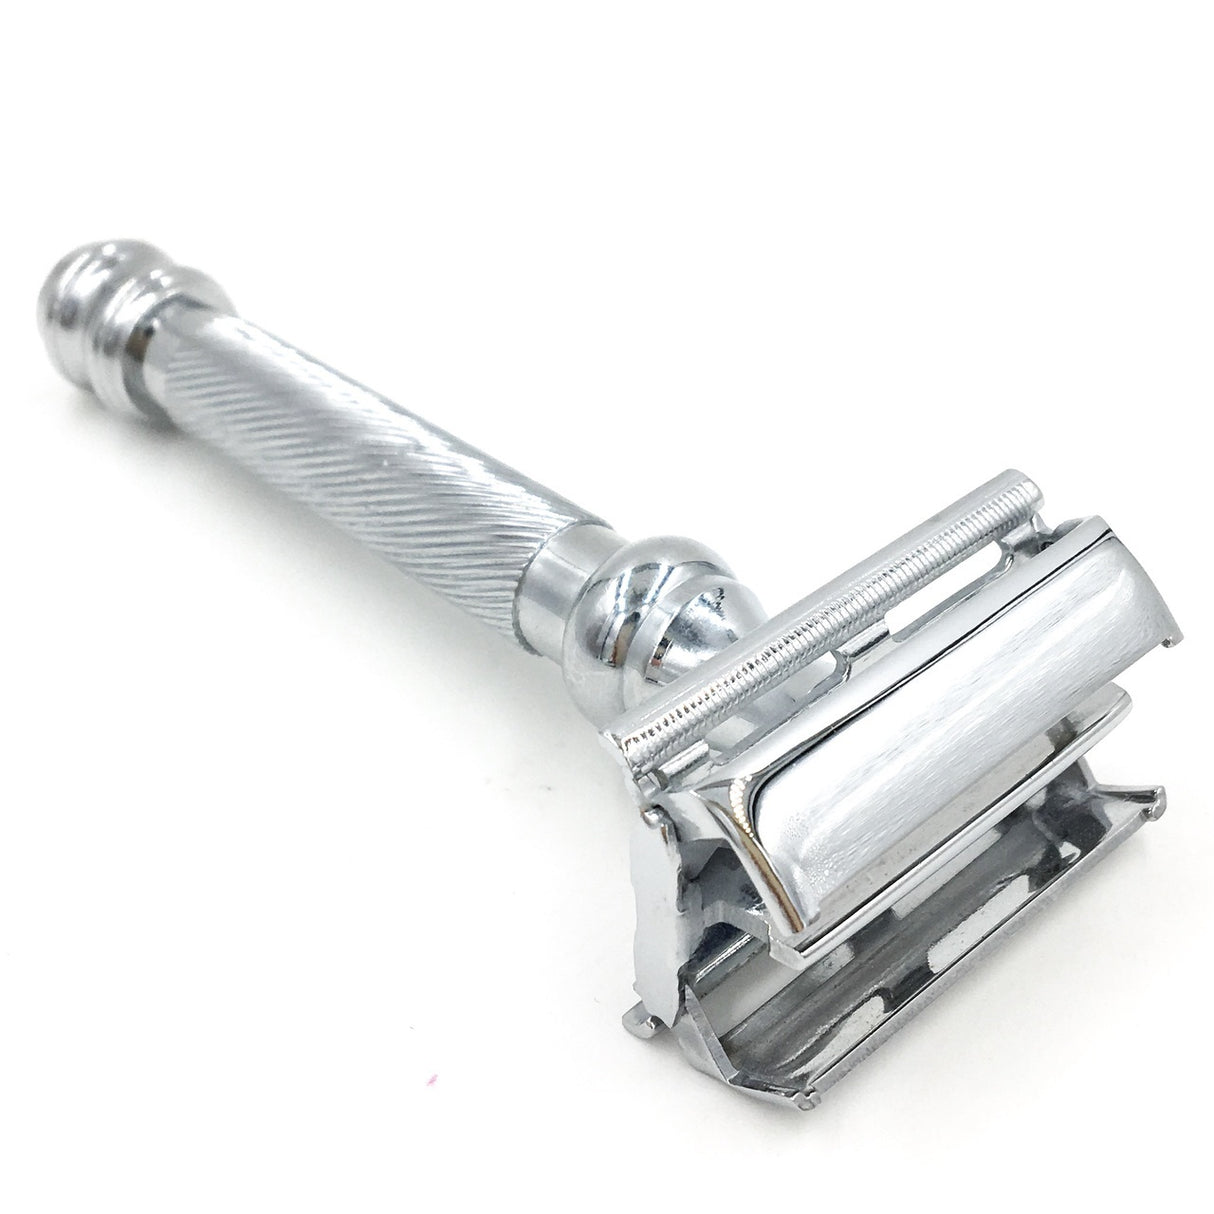 The Parker 99R is an extremely popular safety razor**. Launched in 2008, this hefty razor was an immediate success because of the awesome shave quality it delivered. The razor has a distinguished knurled handle, heavyweight feel and a unique butterfly door mechanism which is activated by turning the knob at the bottom of the razor. It is a great razor for both new and seasoned wet shaving enthusiasts.